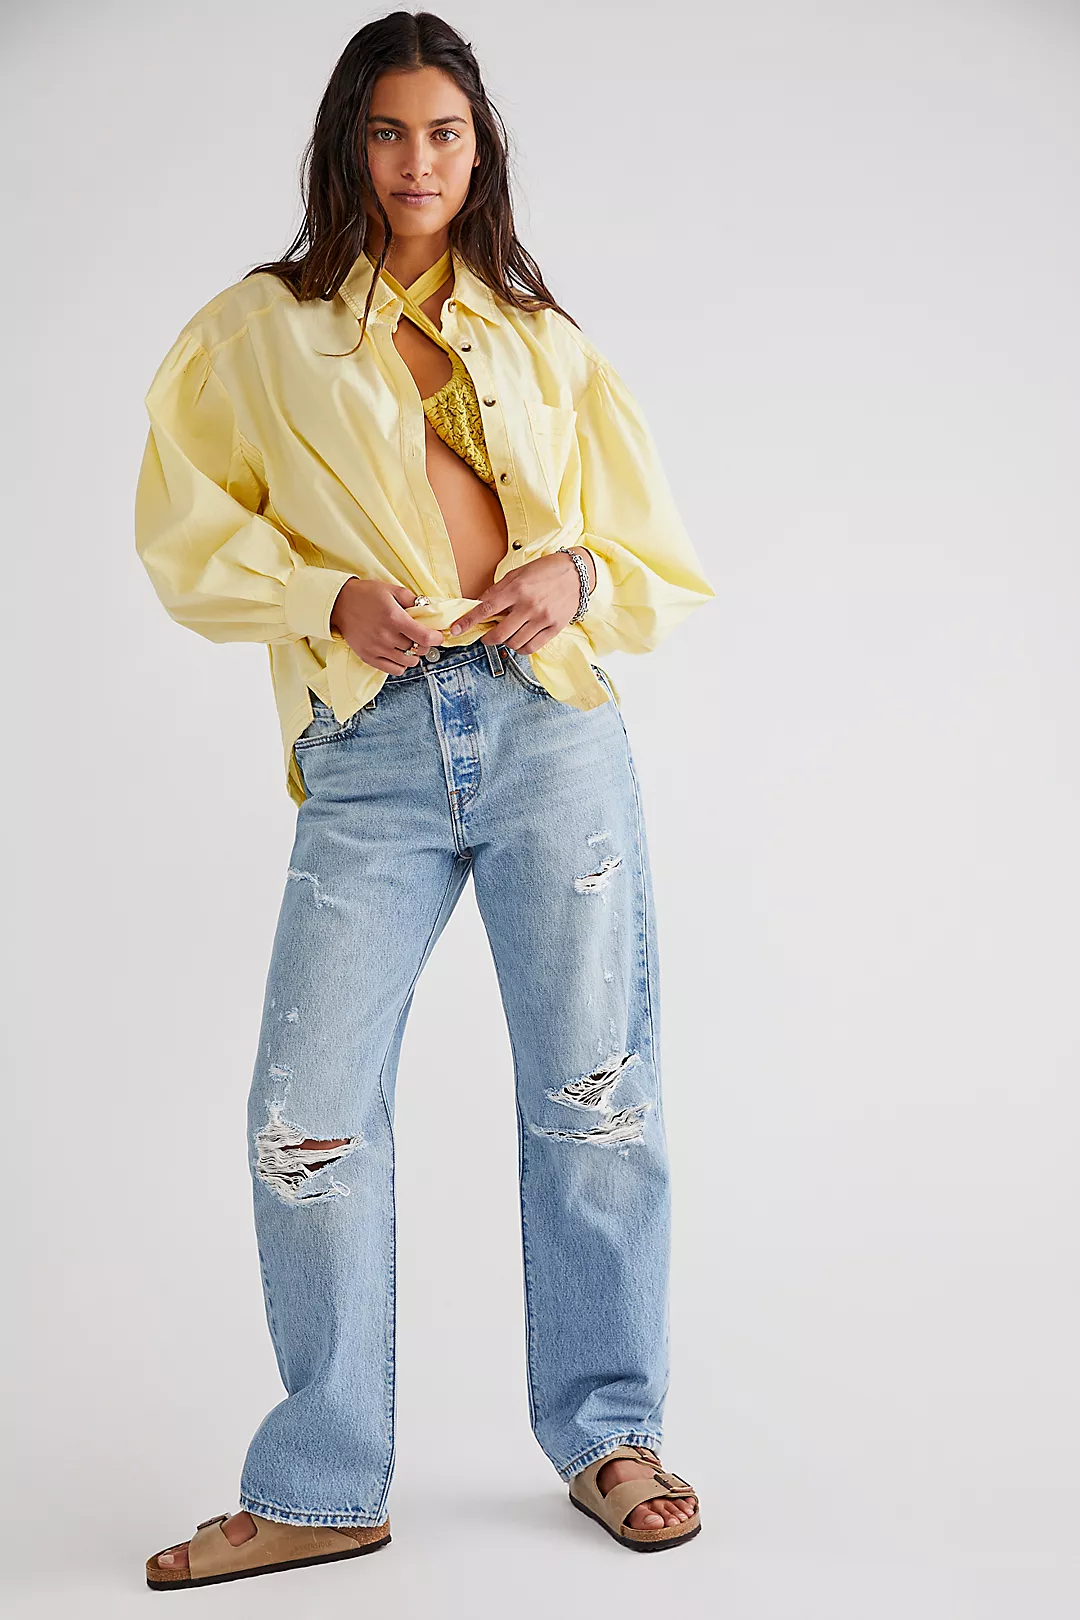 Levi's 90's 501 Jeans At Freepeople